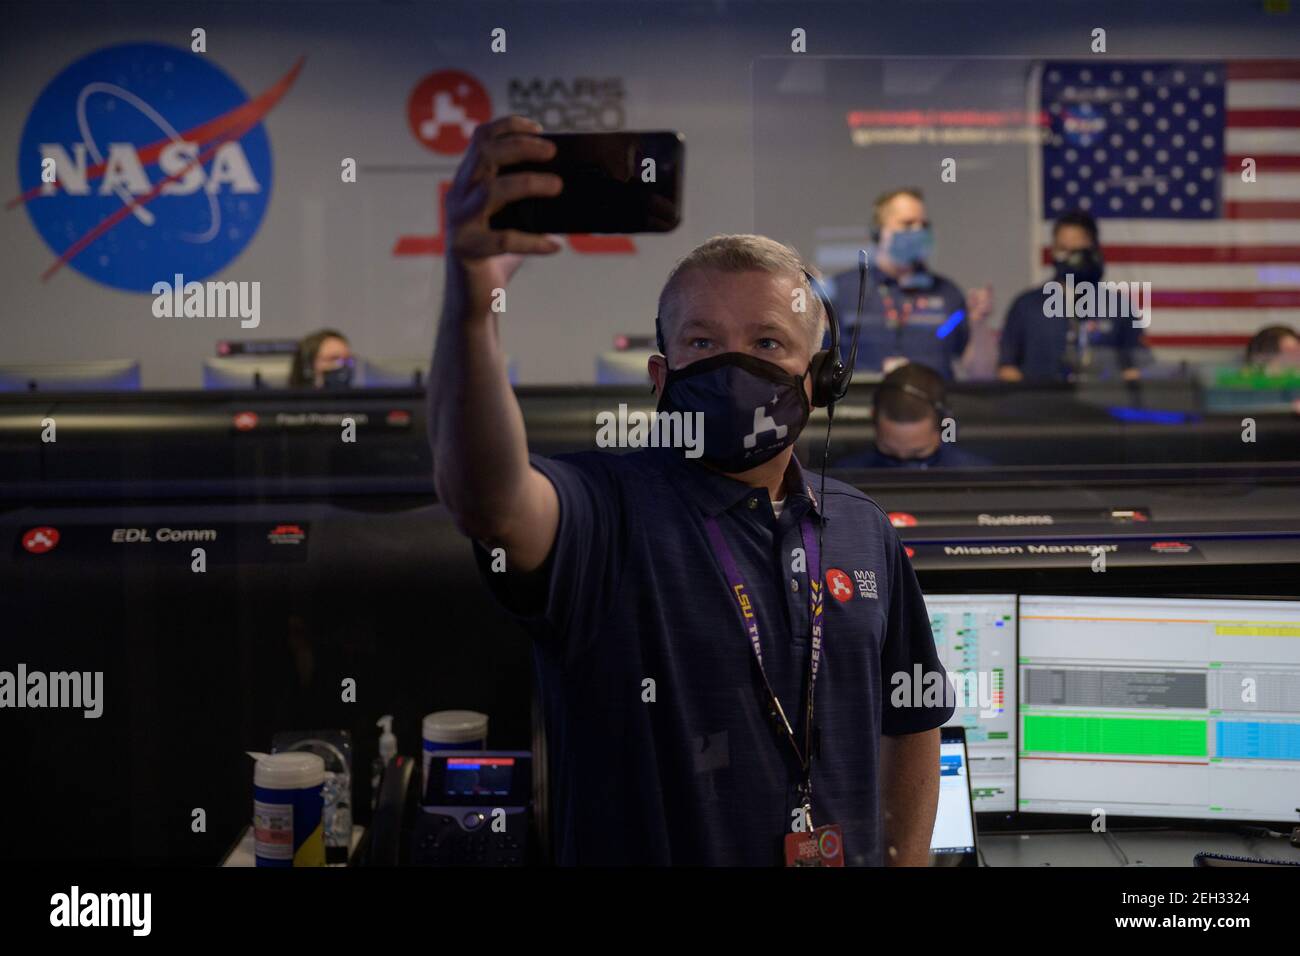 Pasadena, California. 18th Feb 2021. Perseverance mission manager Keith Comeaux takes a selfie as the NASA's Perseverance Mars rover team begins to settle in to track landing in mission control, on Thursday, February 18, 2021, at NASA's Jet Propulsion Laboratory in Pasadena, California. A key objective for Perseverance's mission on Mars is astrobiology, including the search for signs of ancient microbial life. Credit: UPI/Alamy Live News Stock Photo